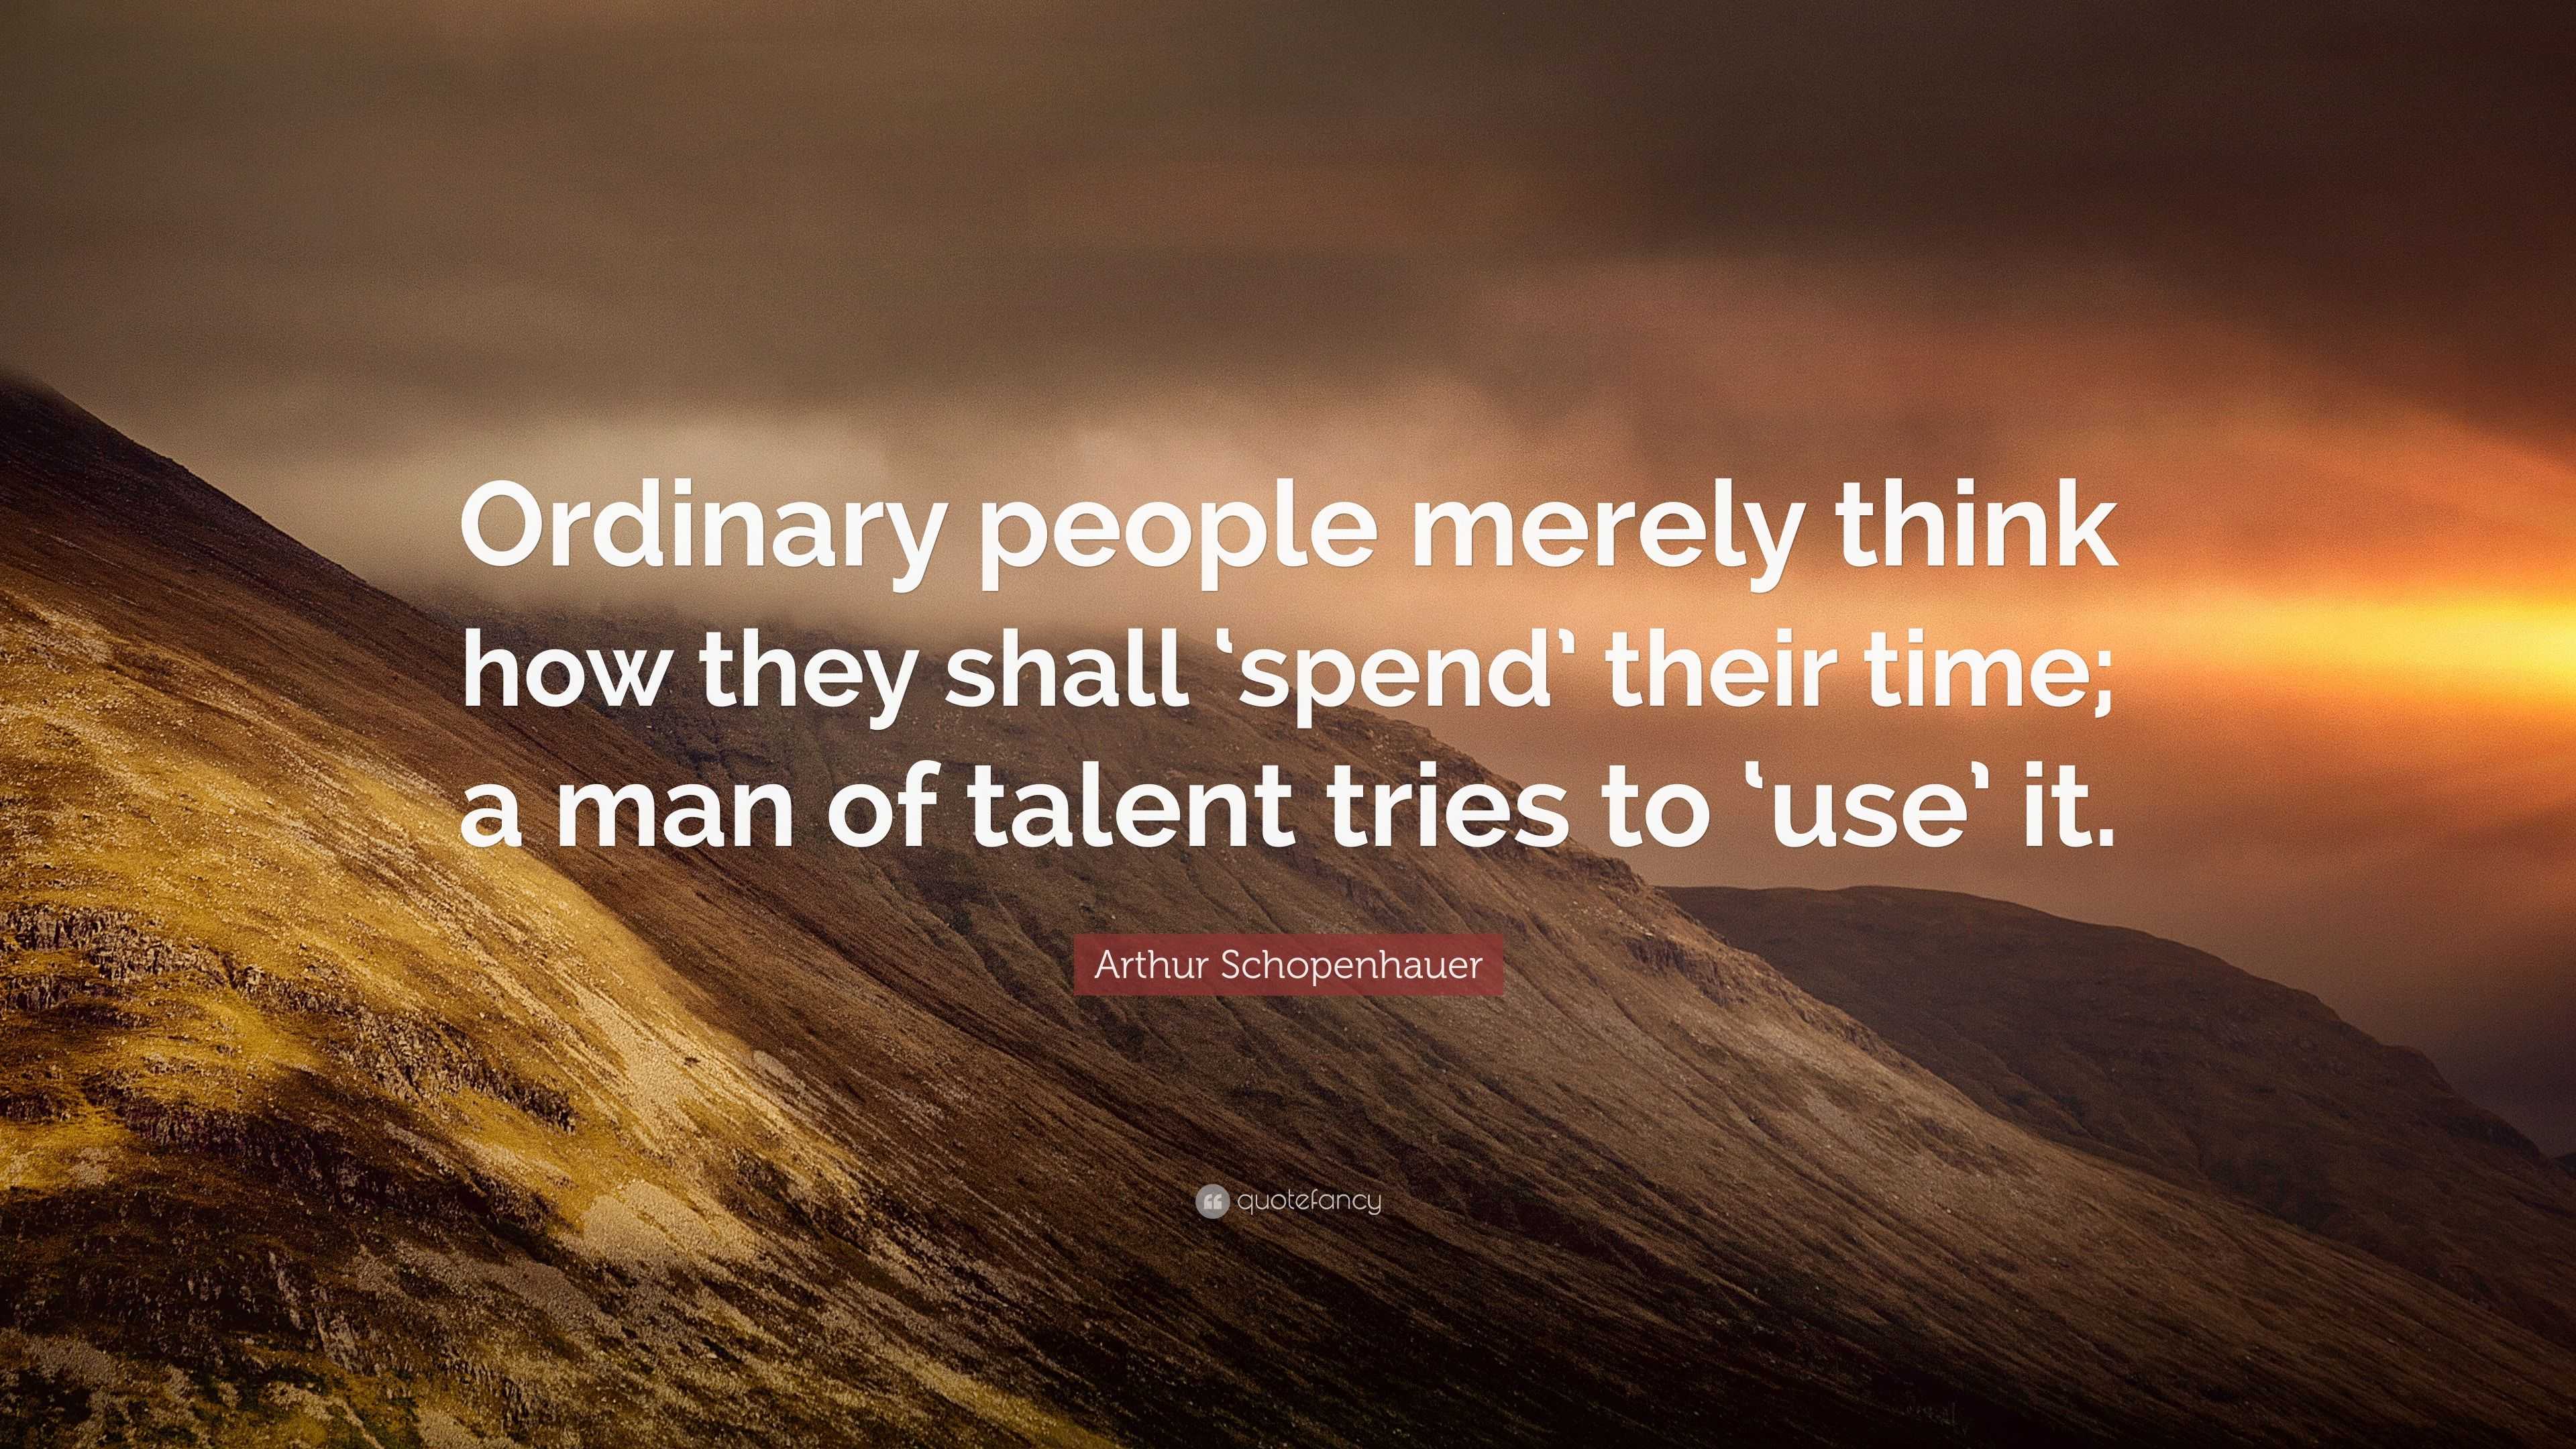 Arthur Schopenhauer Quote: "Ordinary people merely think how they shall 'spend' their time; a ...